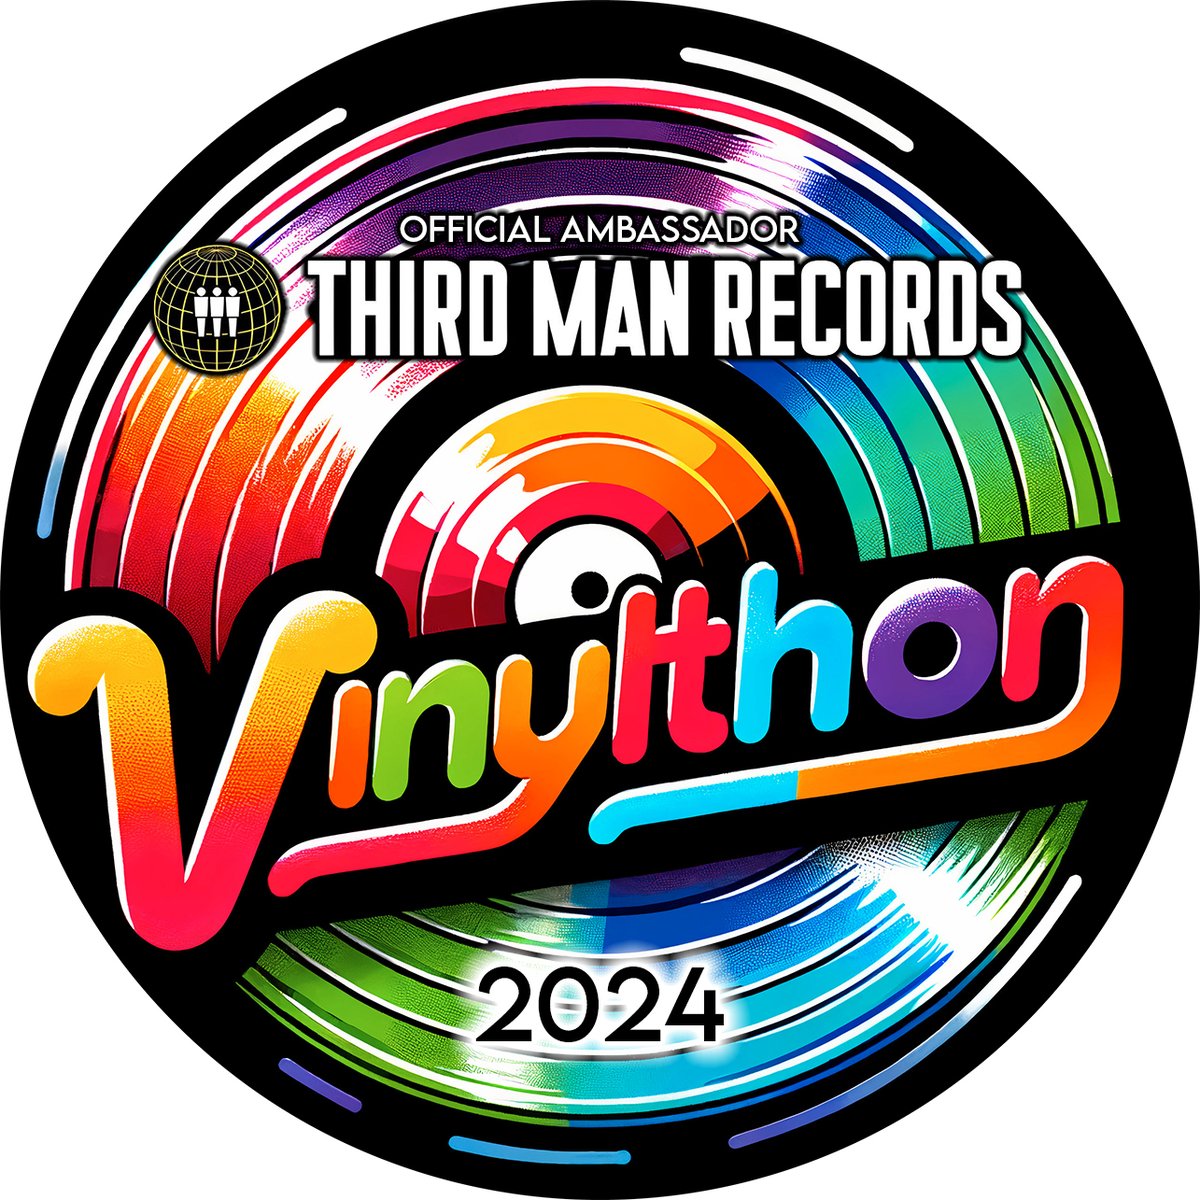 ***BREAKING*** - Third Man Records Announced as Official Ambassador for Vinylthon 2024, coming this Saturday and Sunday! #vinylthon  #invinylwetrust